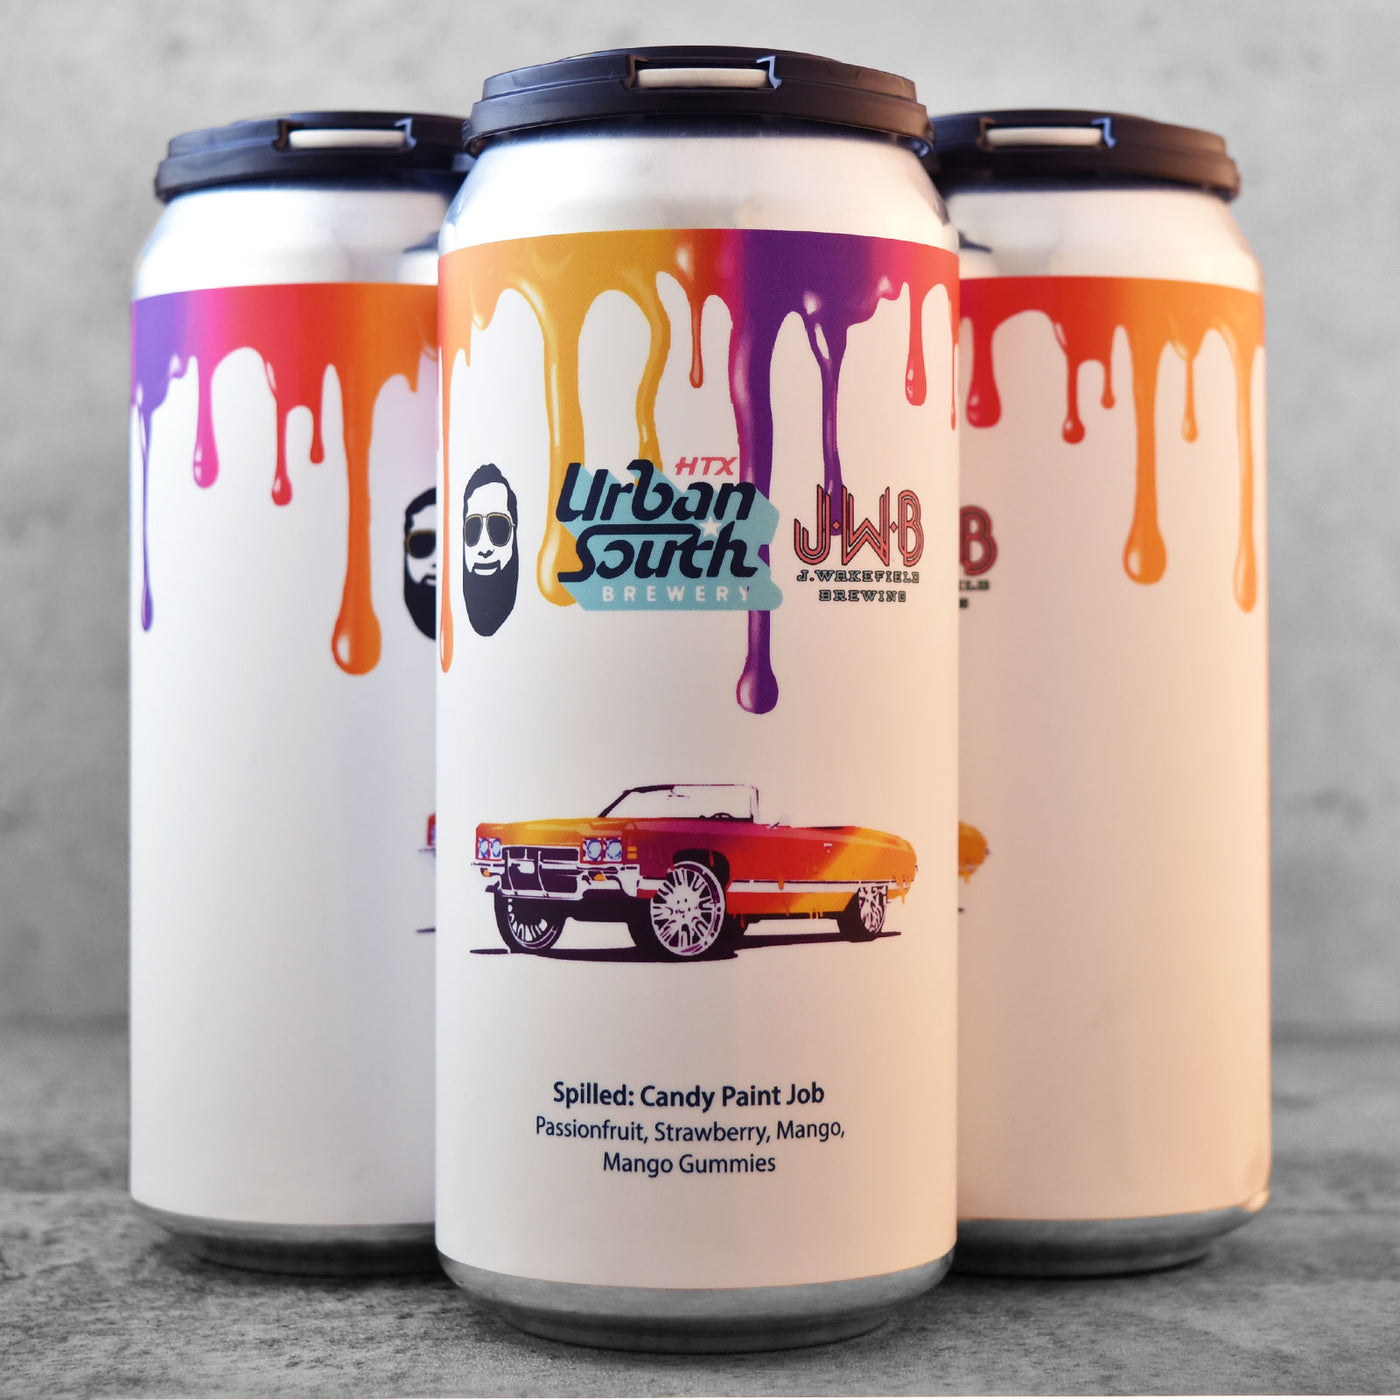 Urban South / J. Wakefield - Spilled: Candy Paint Job